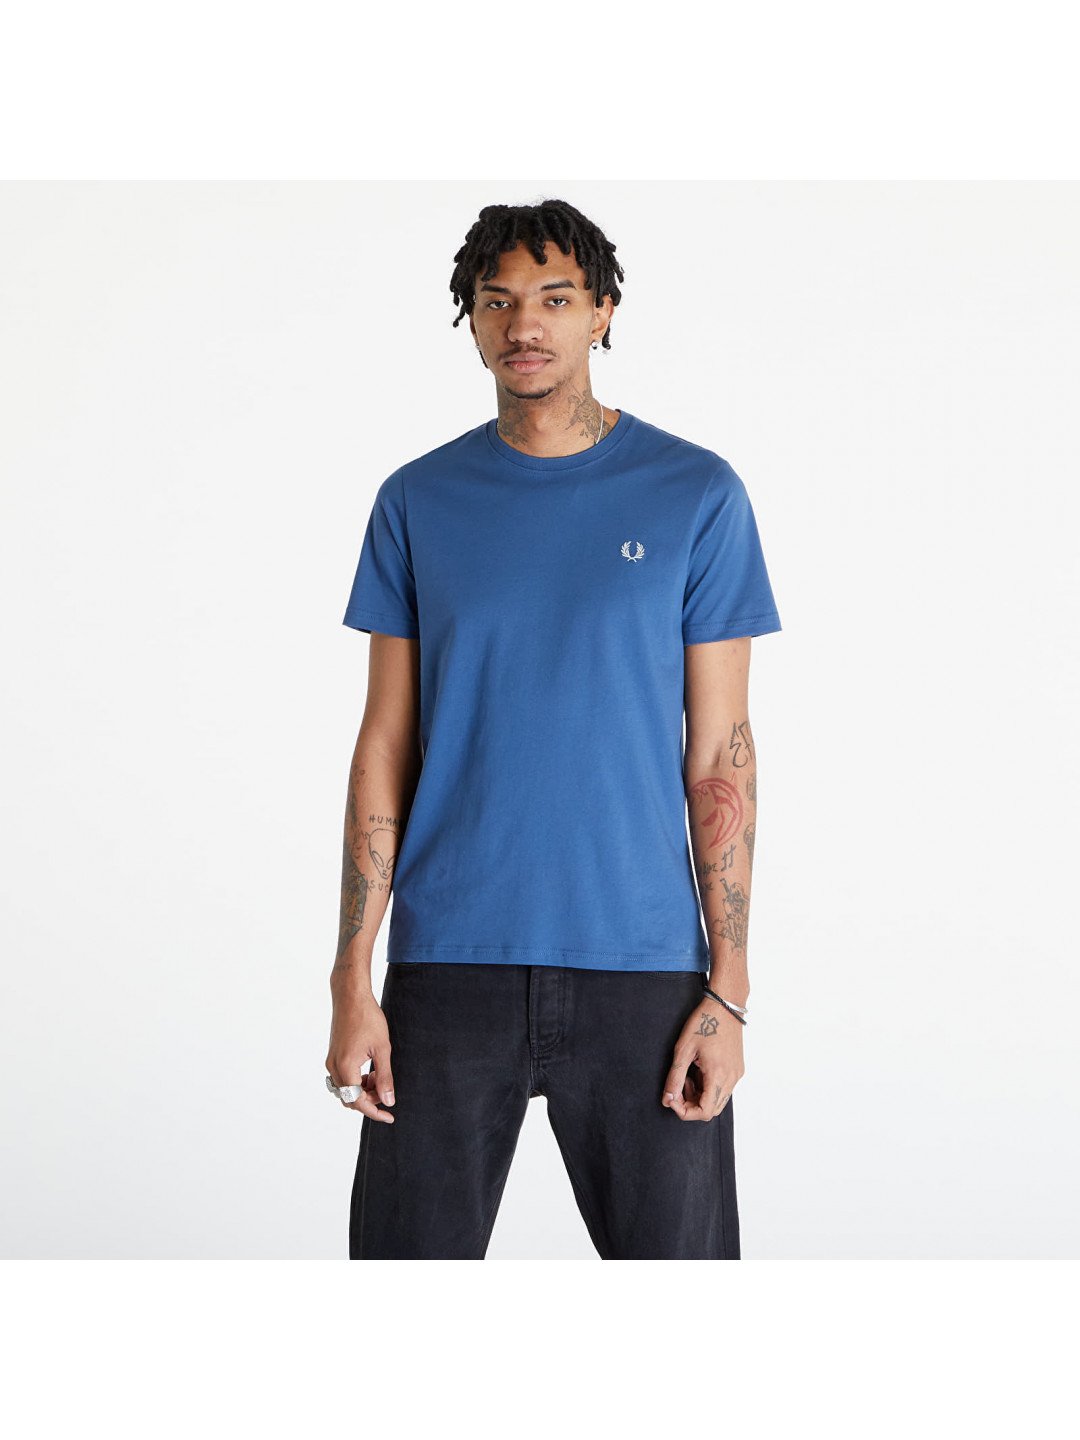 FRED PERRY Crew Neck T-Shirt Midnight Blue Light Ice